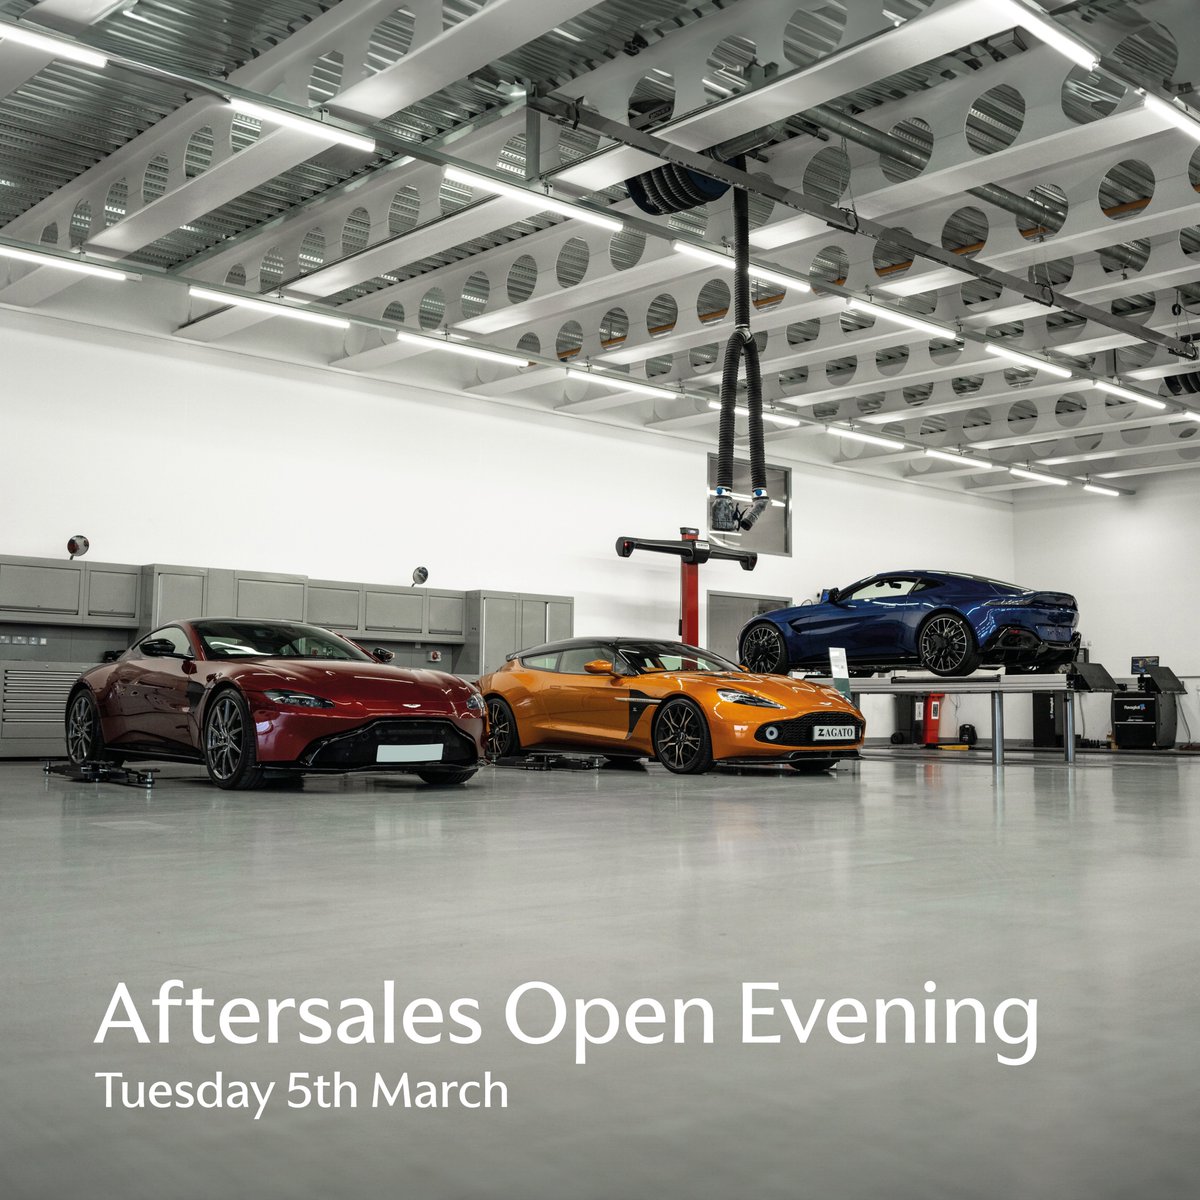 We're looking for experienced and qualified personnel to join our team at Aston Martin Bristol. If you have experience as a Vehicle Technician or Parts Advisor, join us on Tuesday 5 March where we will be opening our doors between 5 - 7pm. Find out more: tinyurl.com/3zwb542w